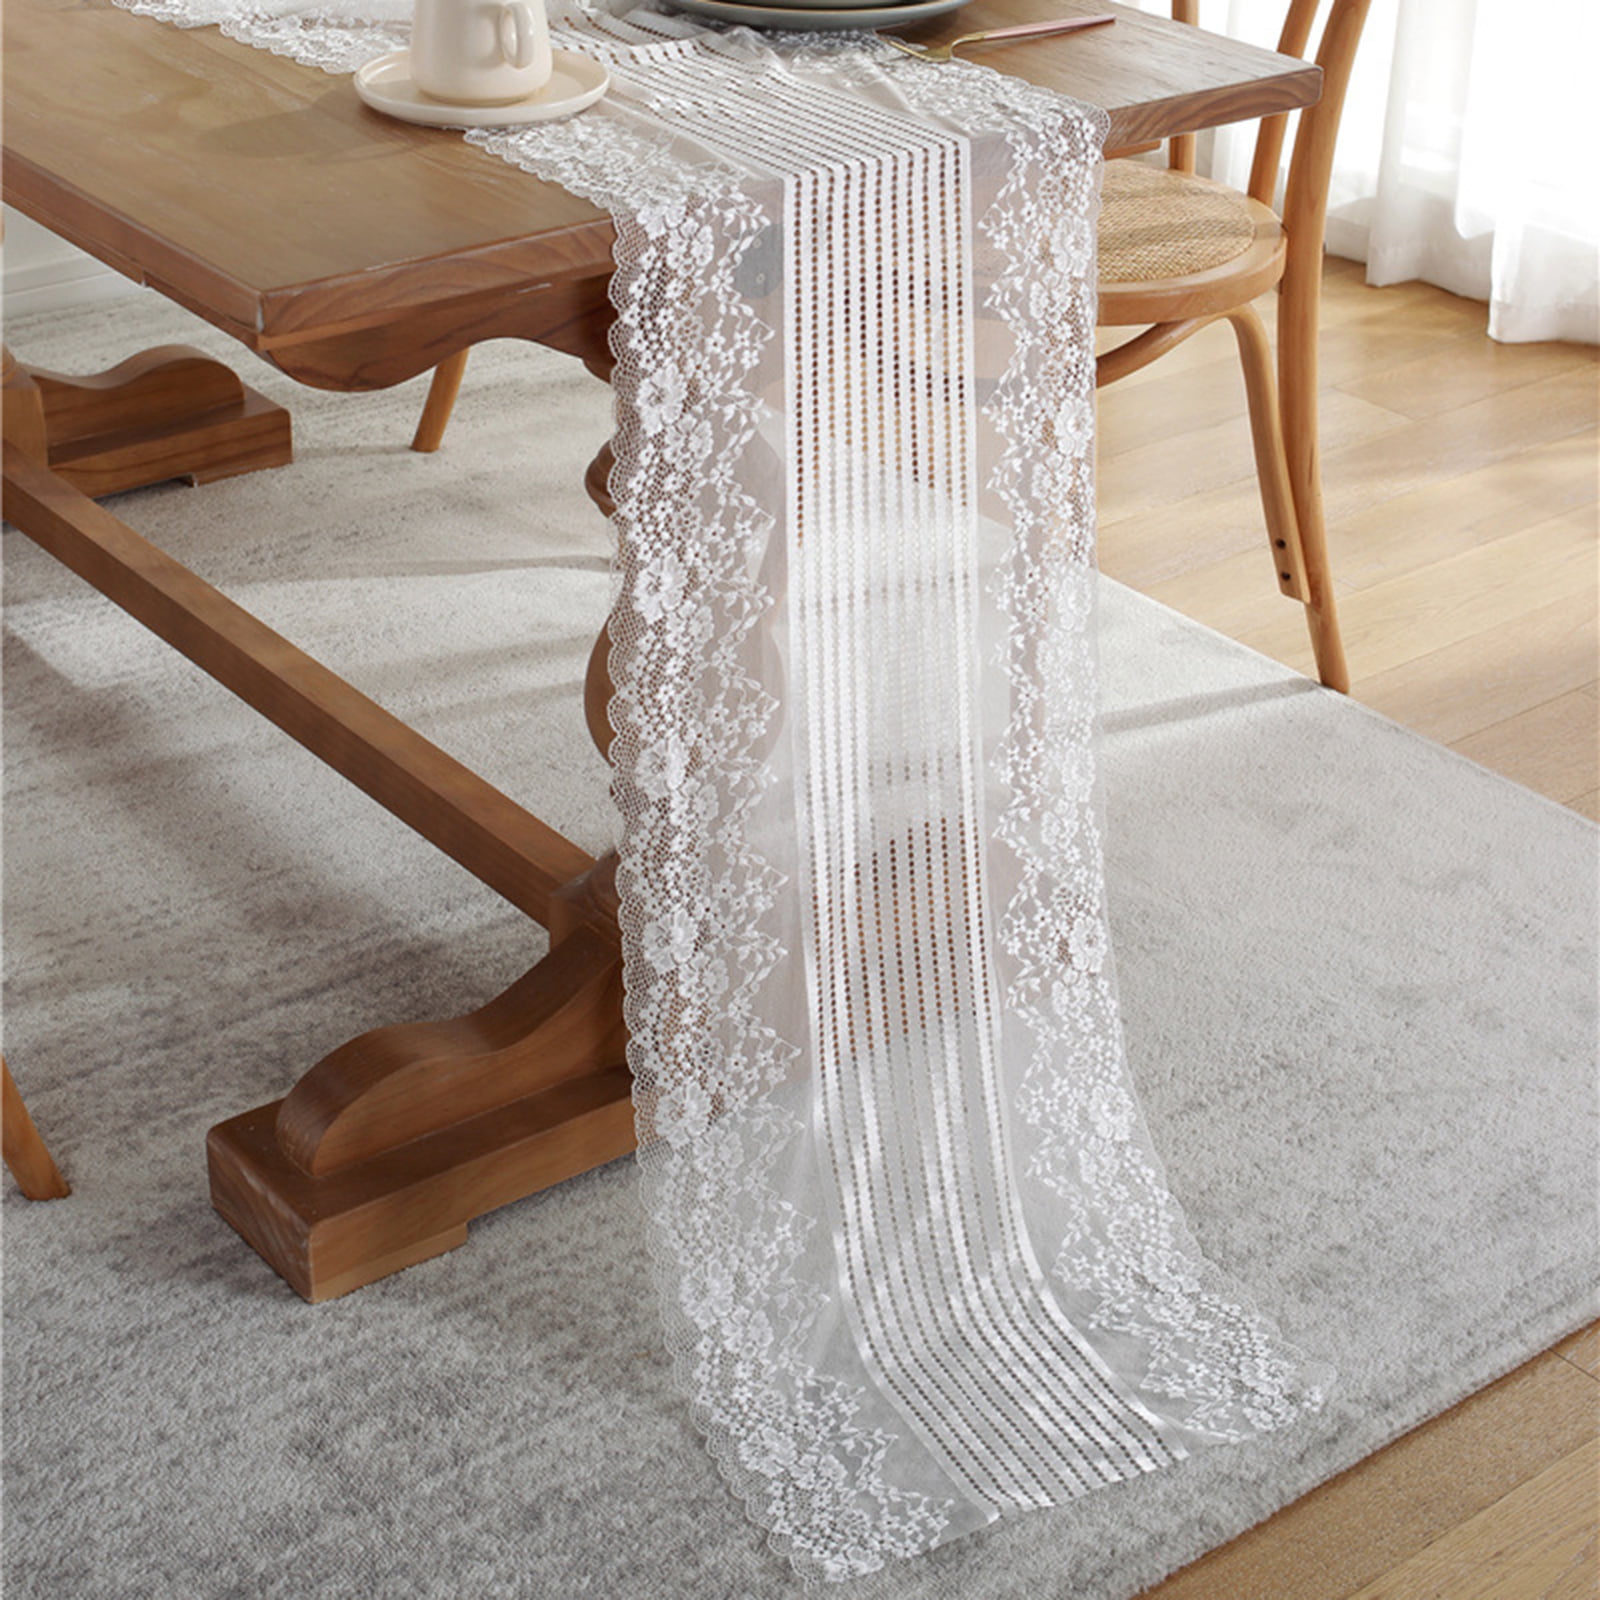 Amazing Small Table Runners Ideal for Coffee Table Oval Embroidered Tablecloths